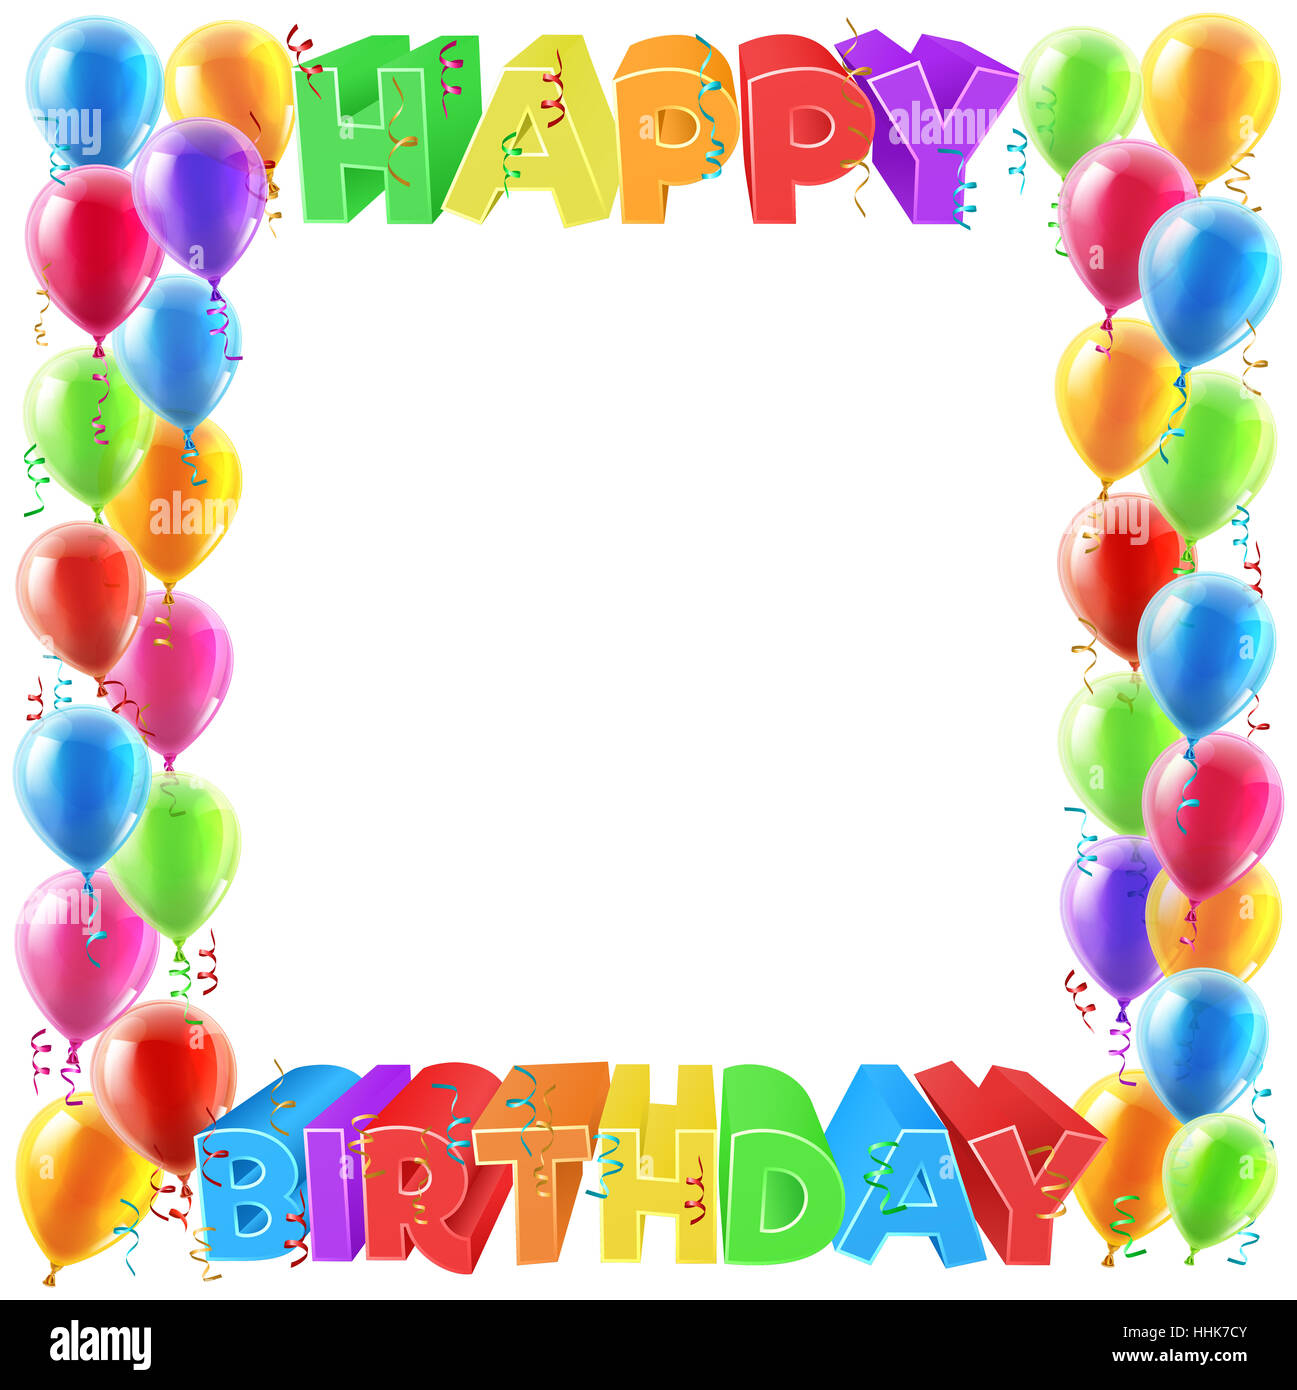 A balloons and Happy Birthday bright color word text sign invite border frame design Stock Photo